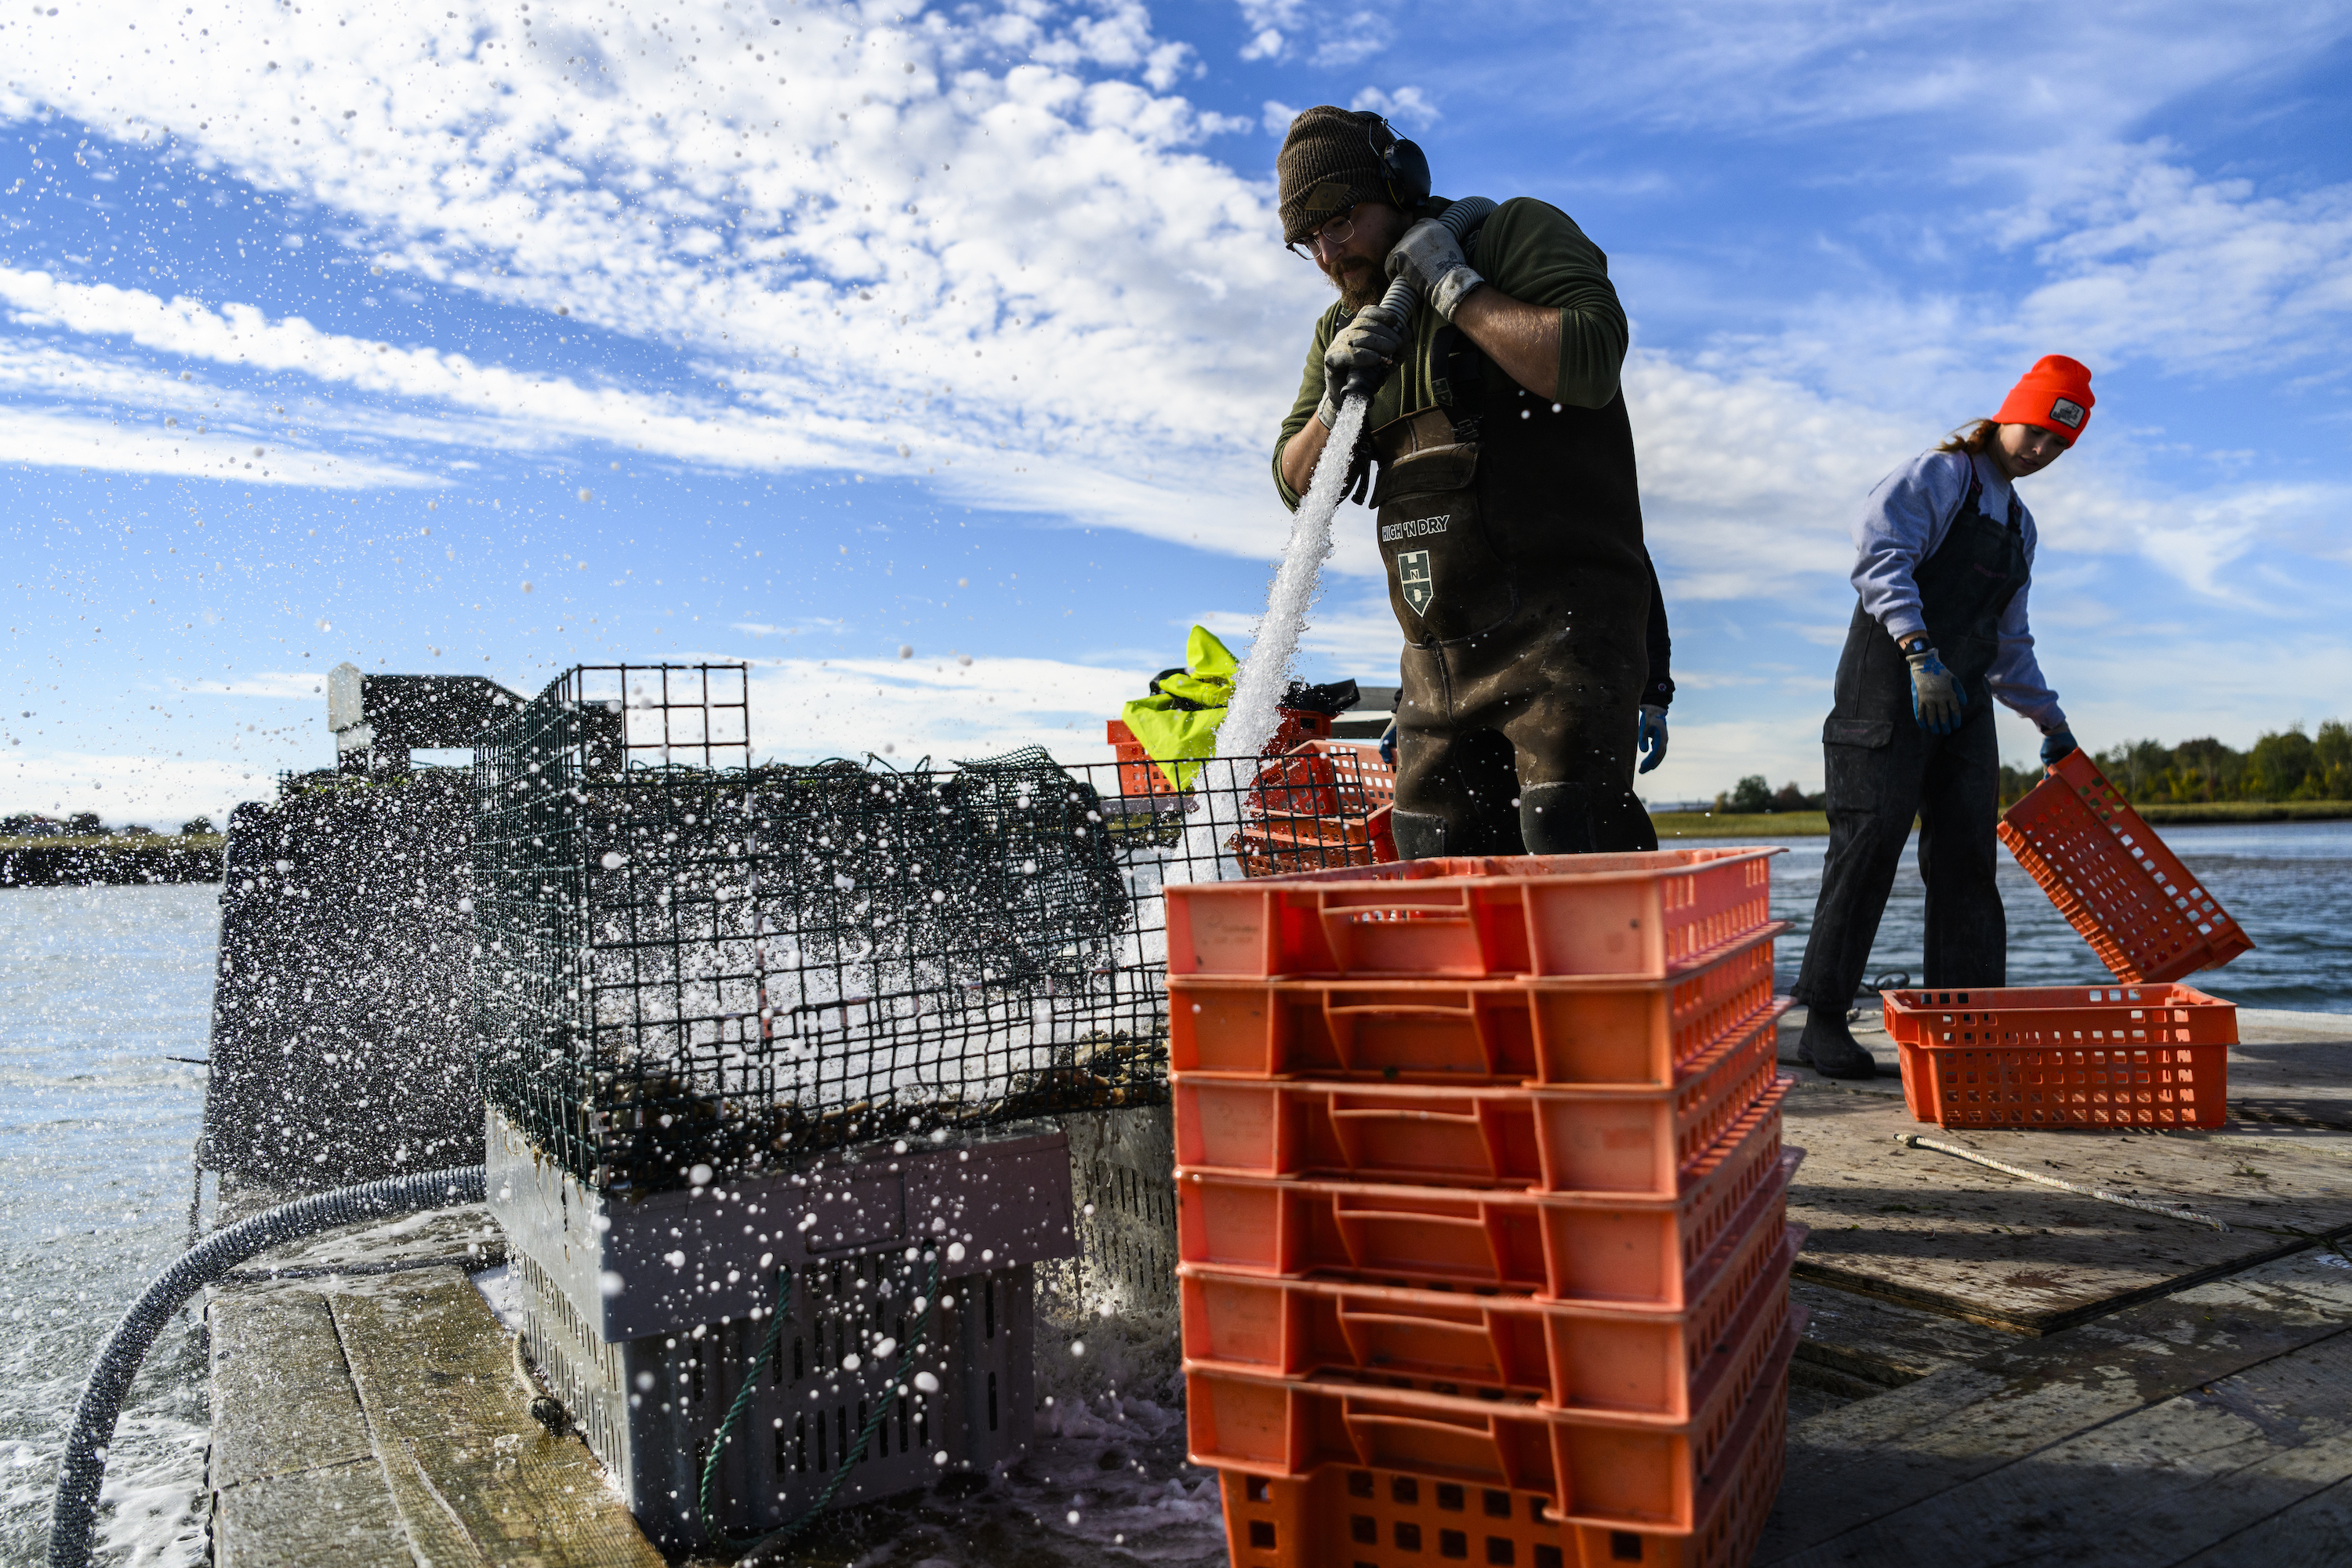 Students on the water harvesting oyster traps